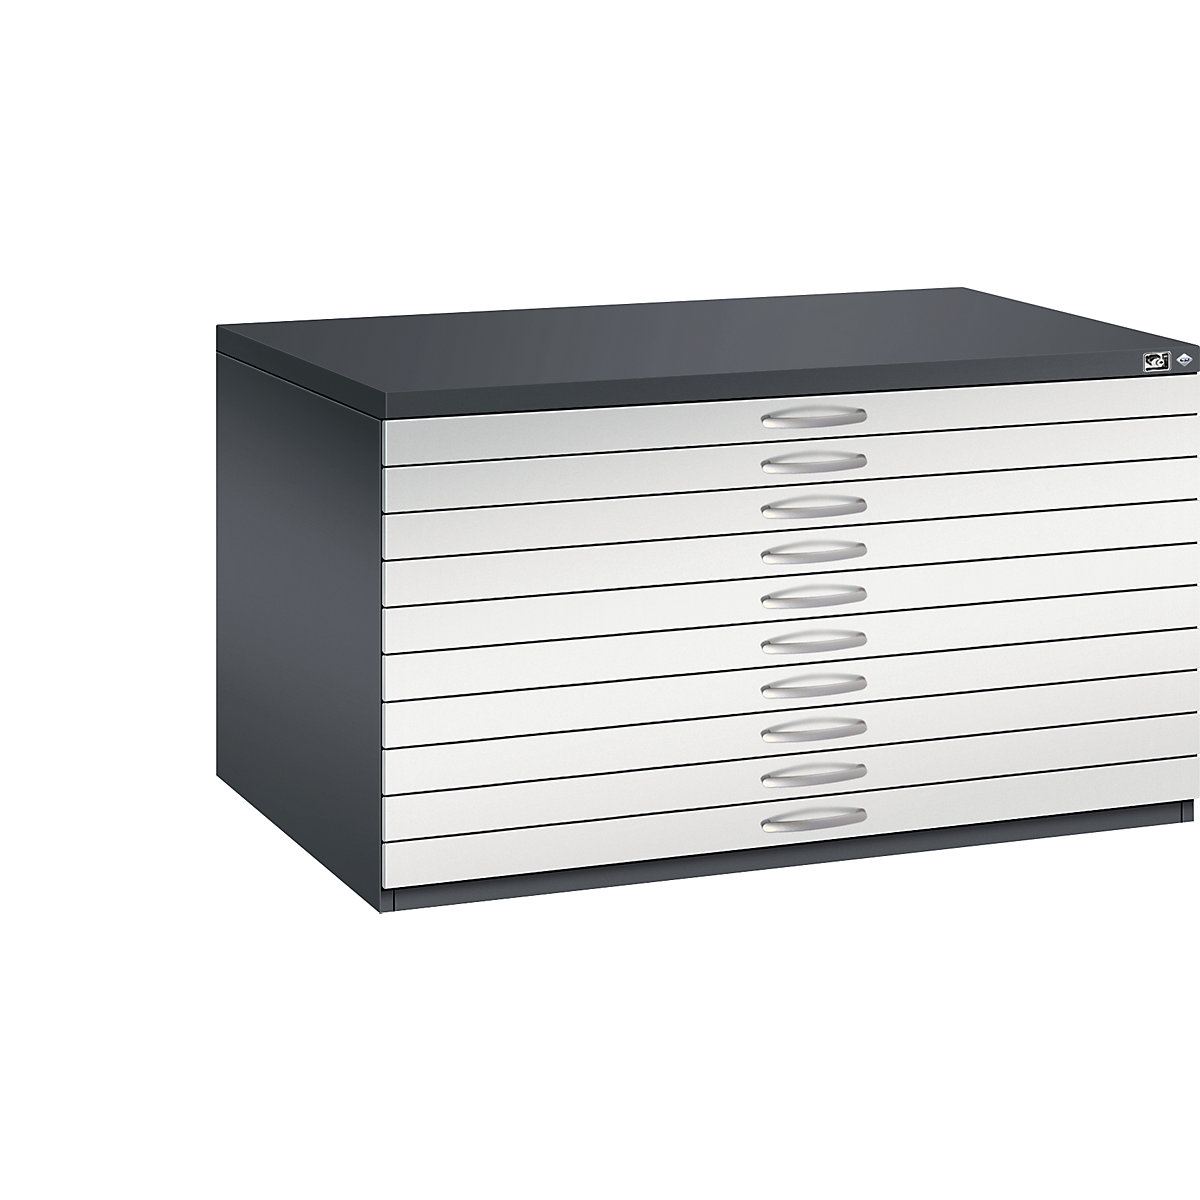 Drawing cabinet – C+P, A0, 10 drawers, height 760 mm, black grey / light grey-19